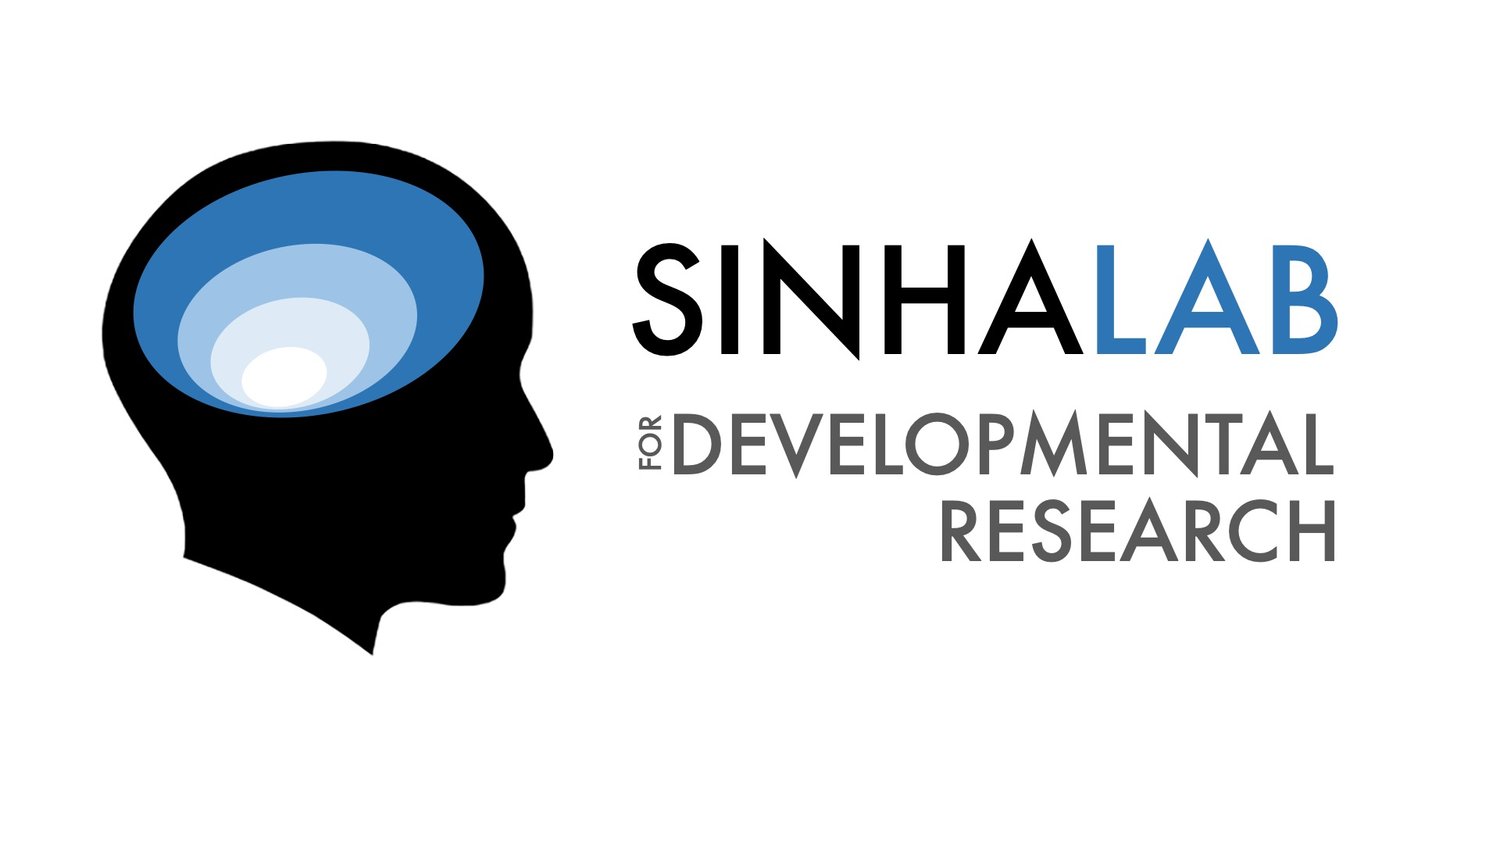 The Sinha Lab for Developmental Research